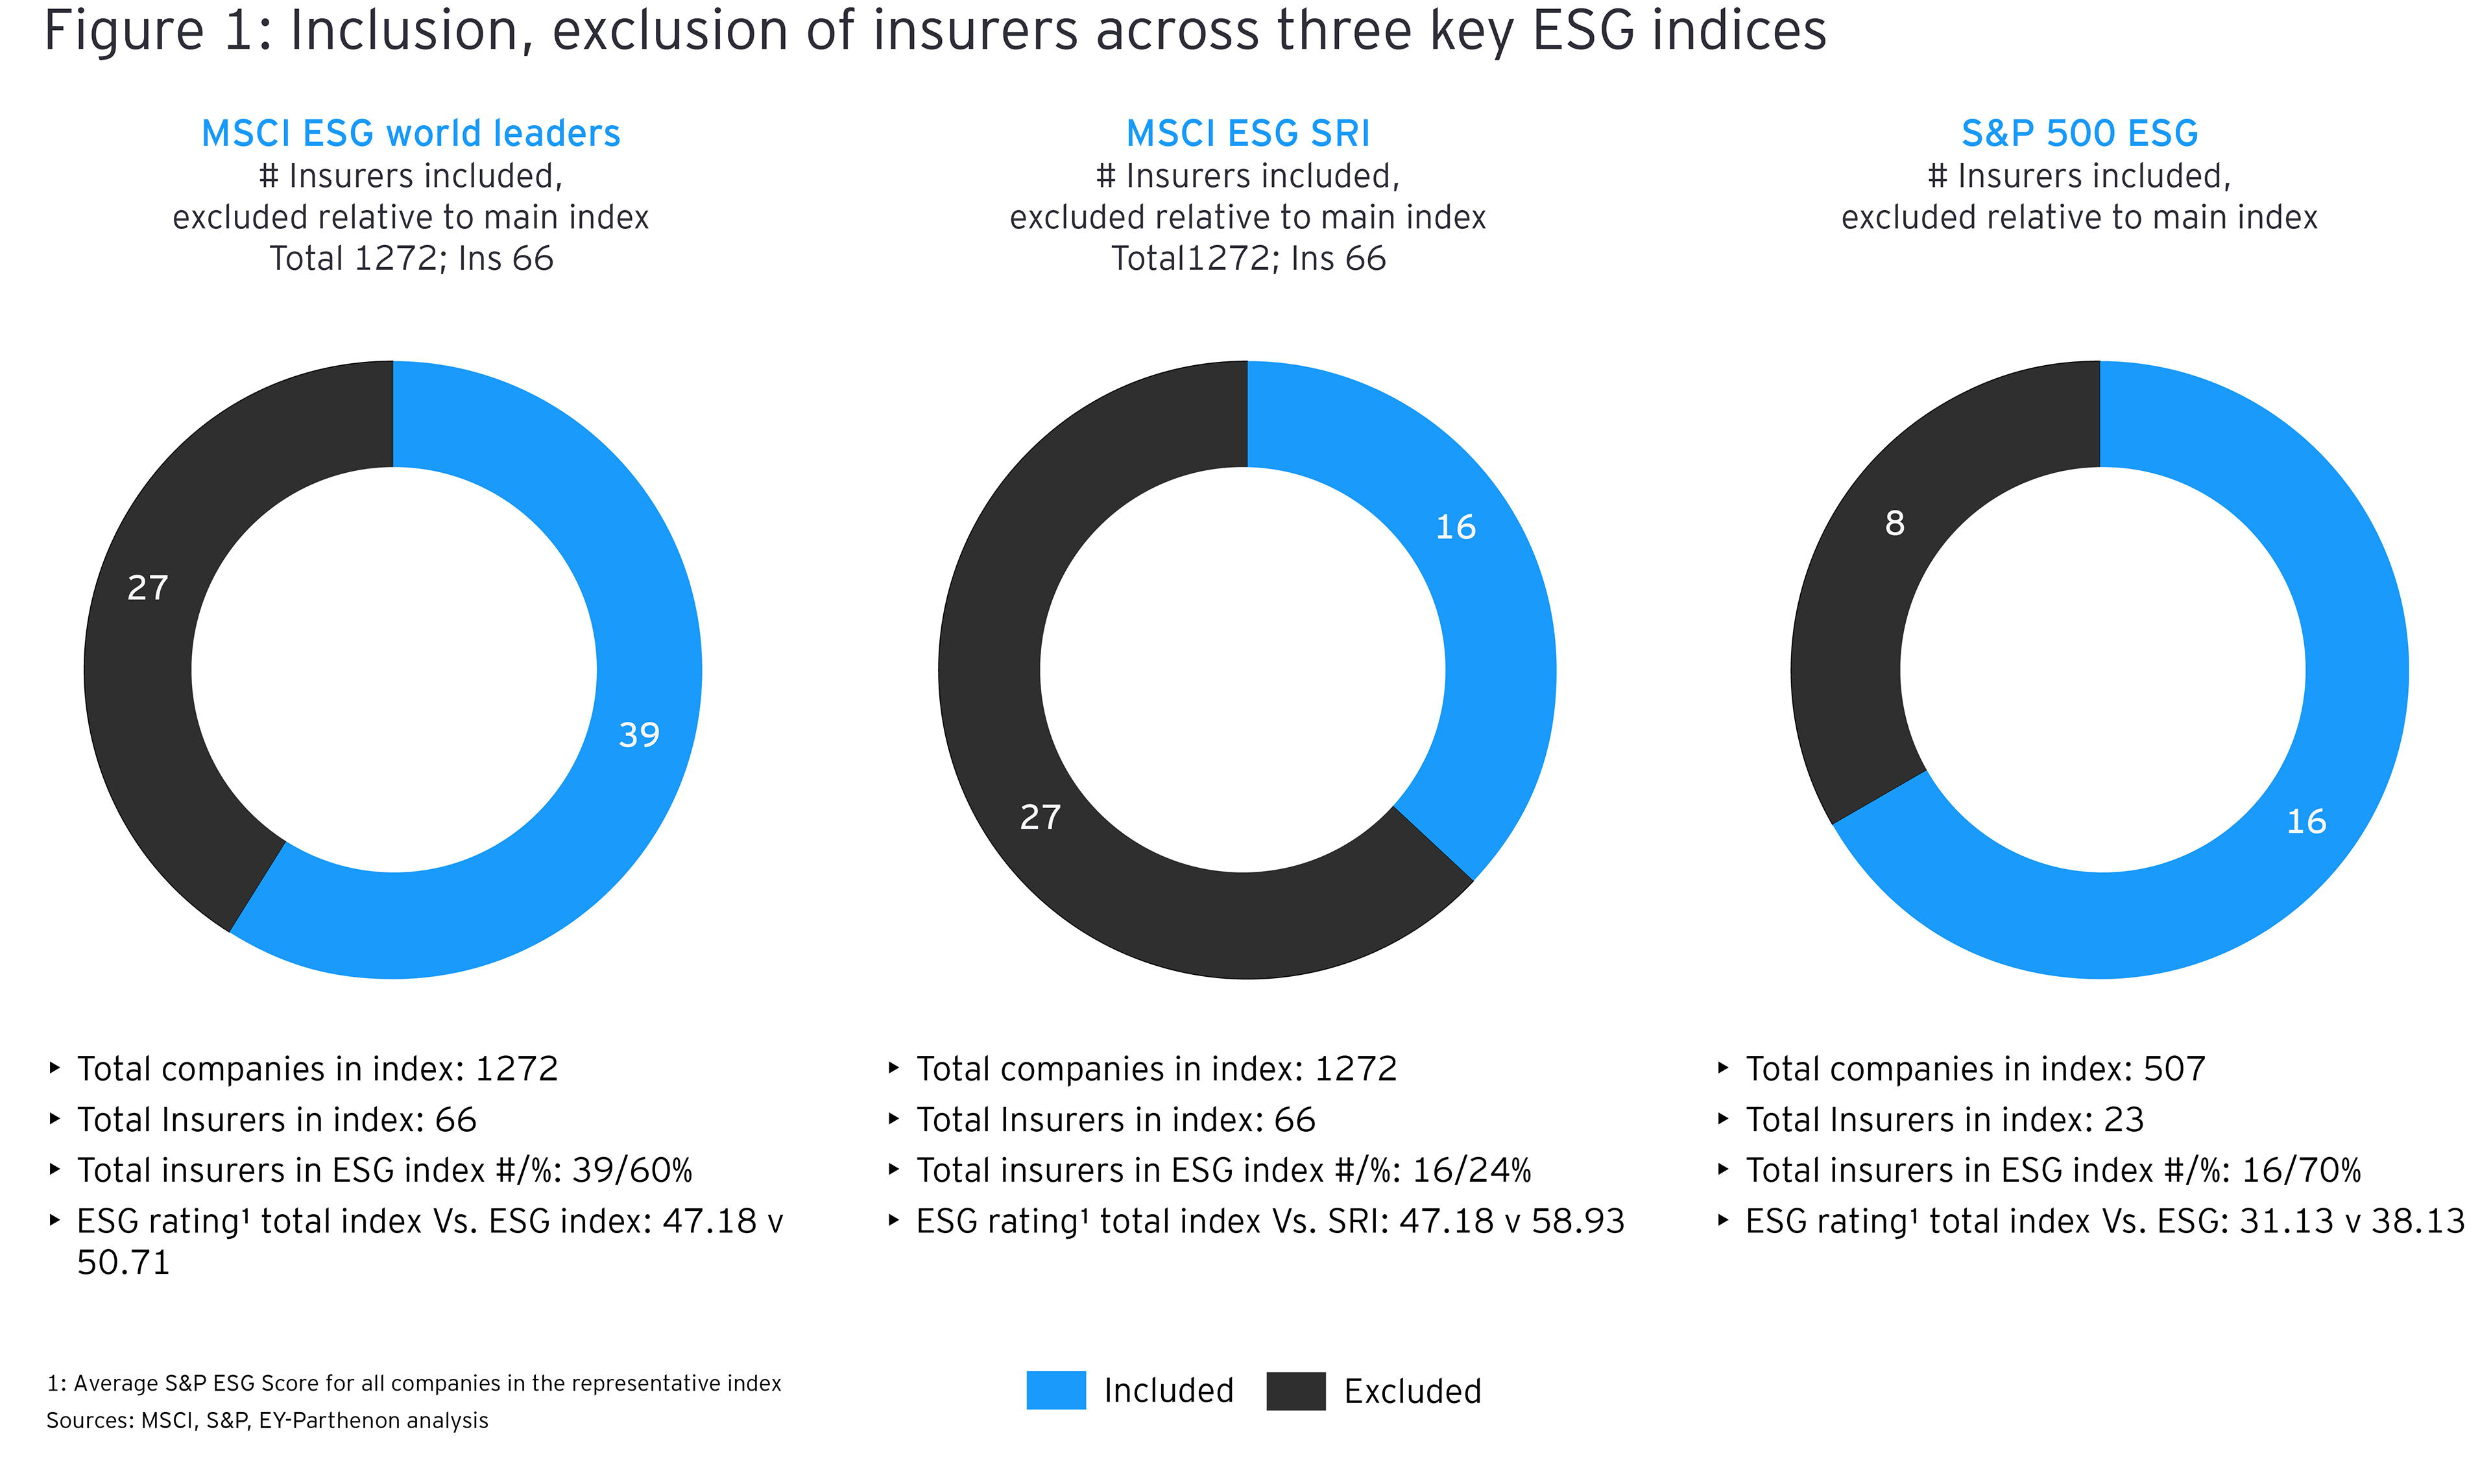 Inclusion, exclusion of insurers across three key ESG indices